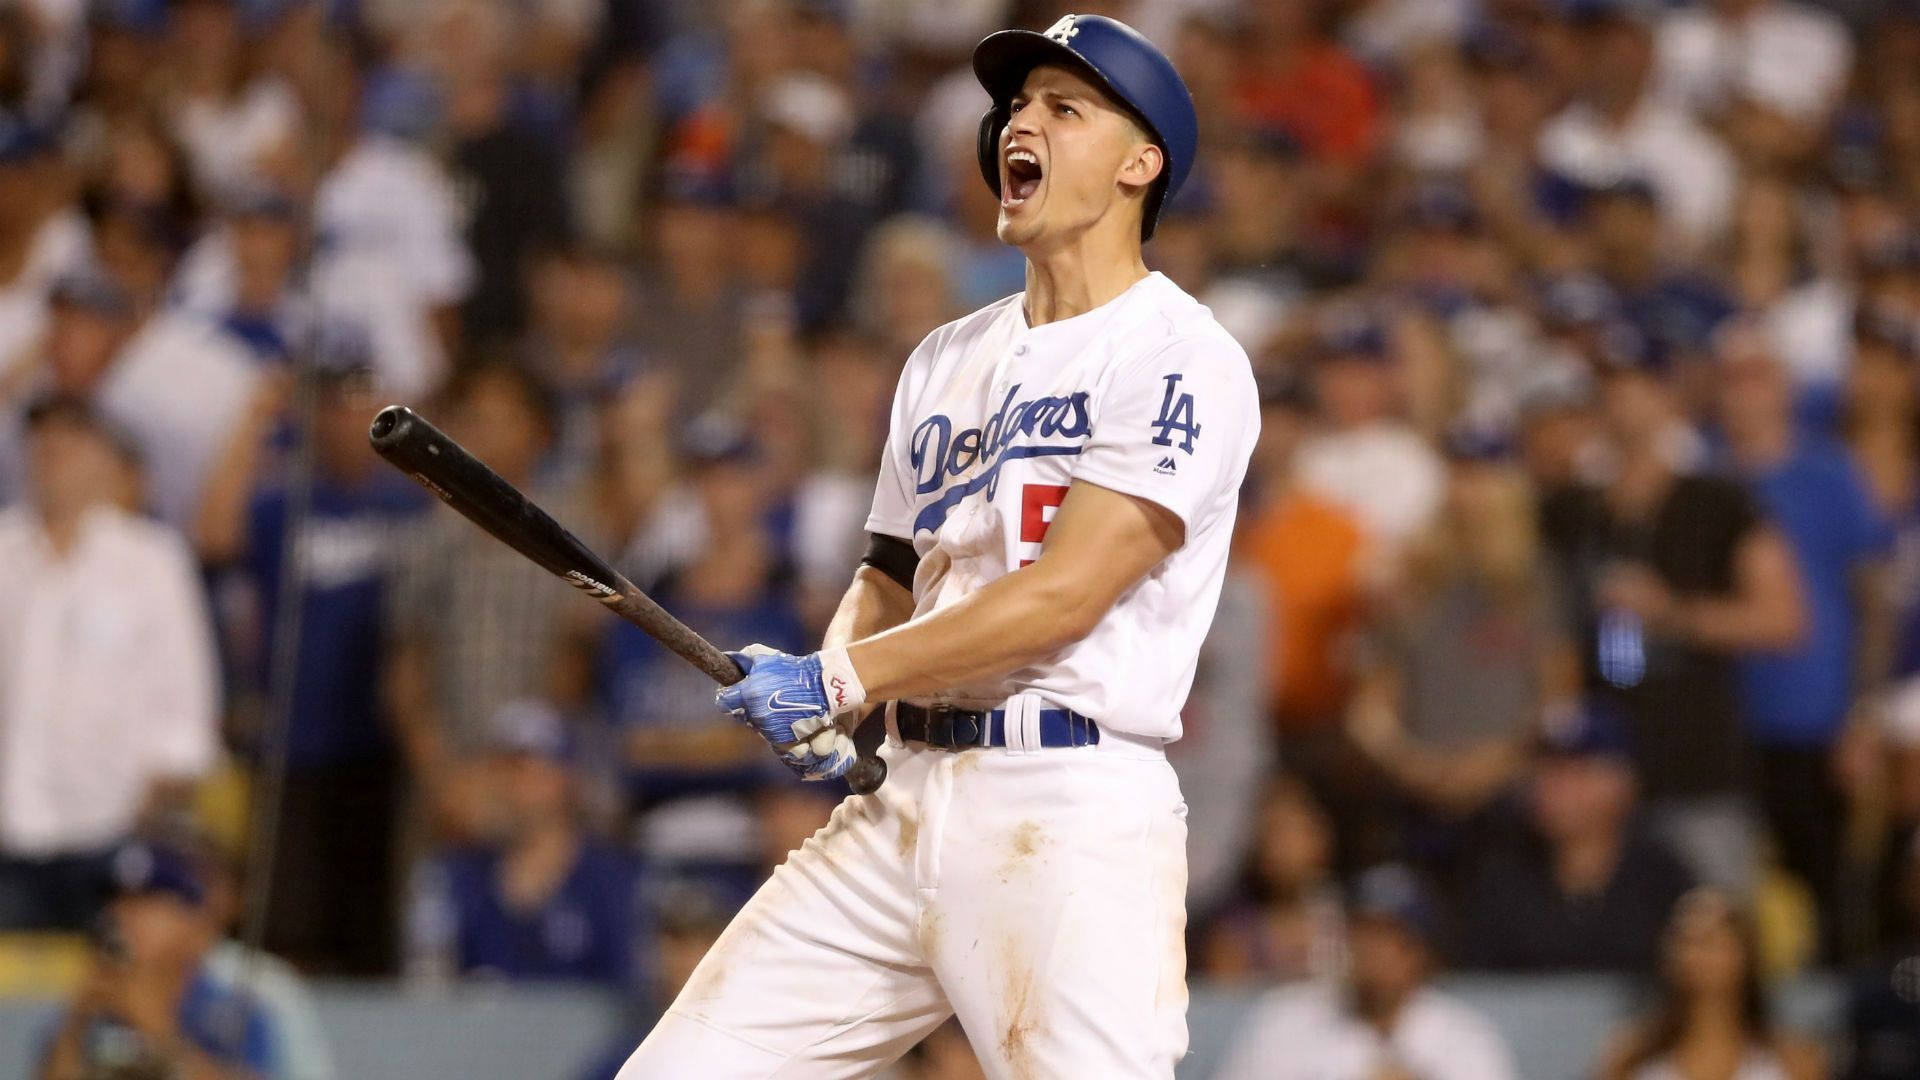 Corey Seager Cheering While Holding A Bat Wallpaper